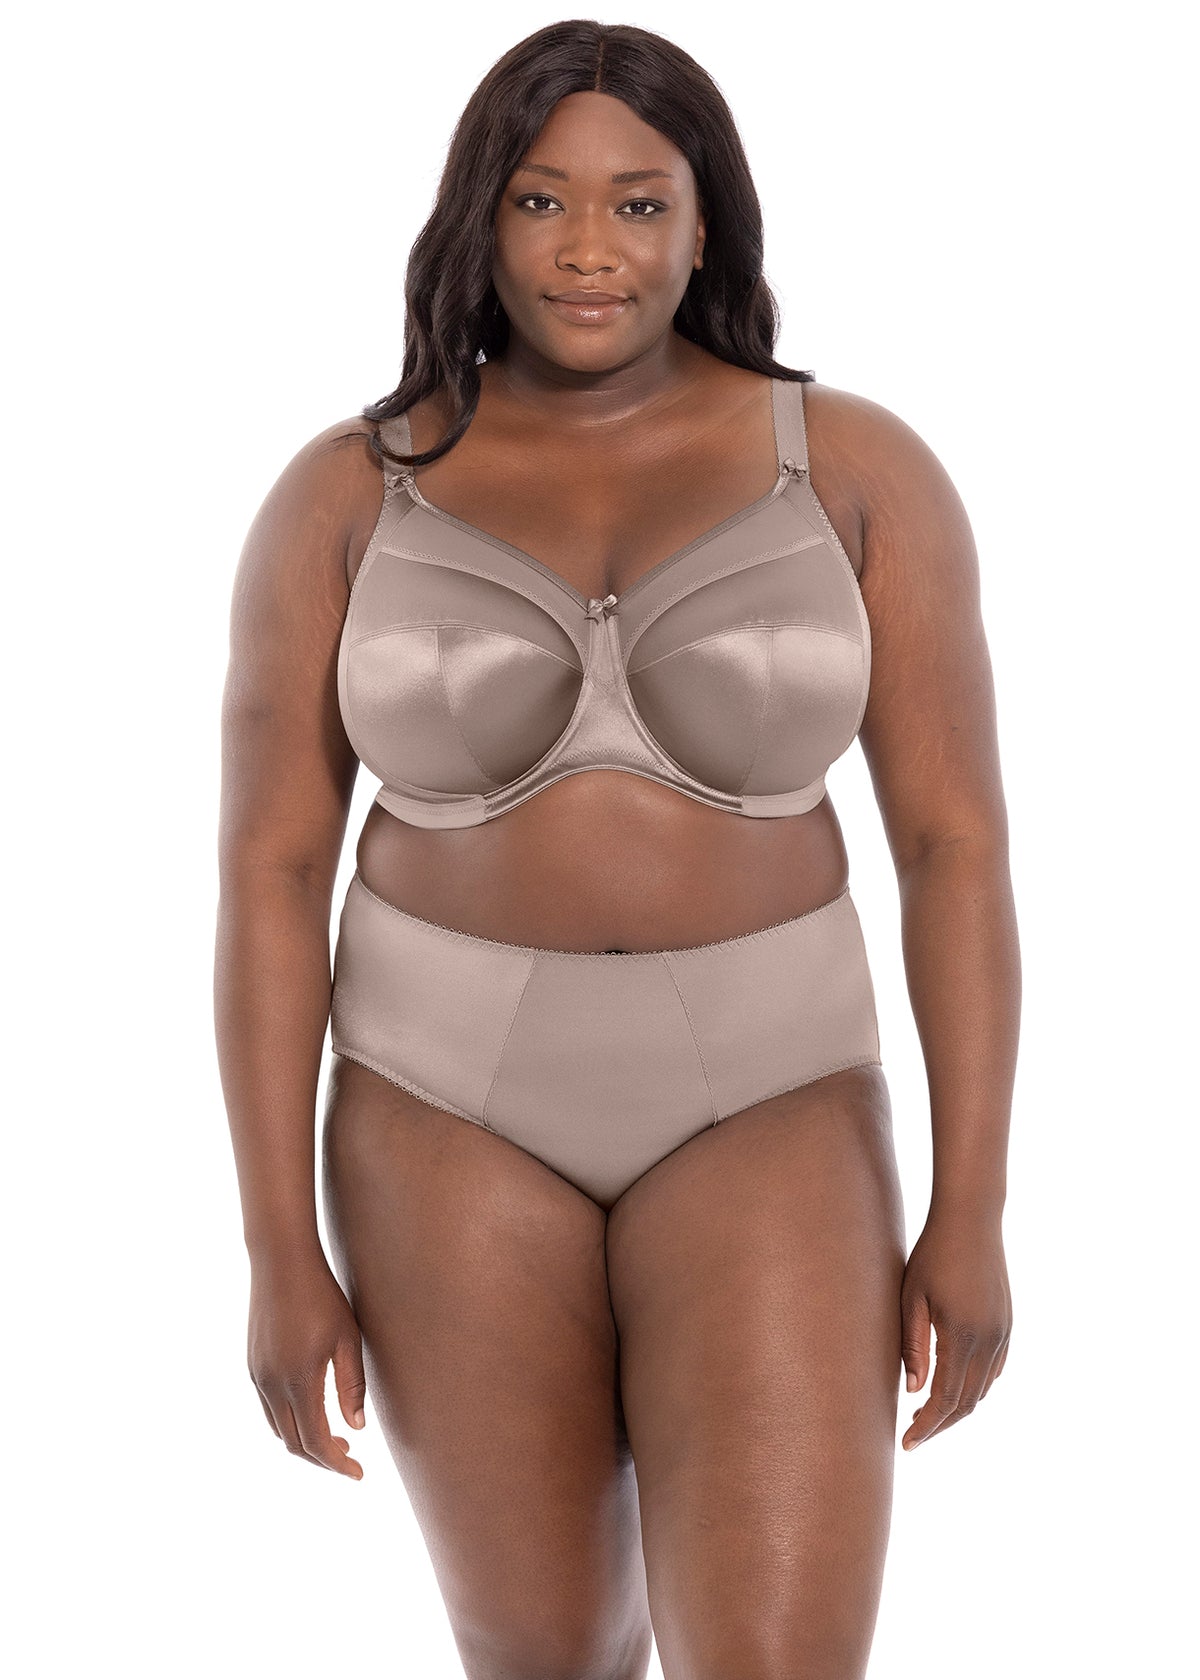 GODDESS KEIRA FULL CUP UNDERWIRE BRA - PEBBLE – Tops & Bottoms